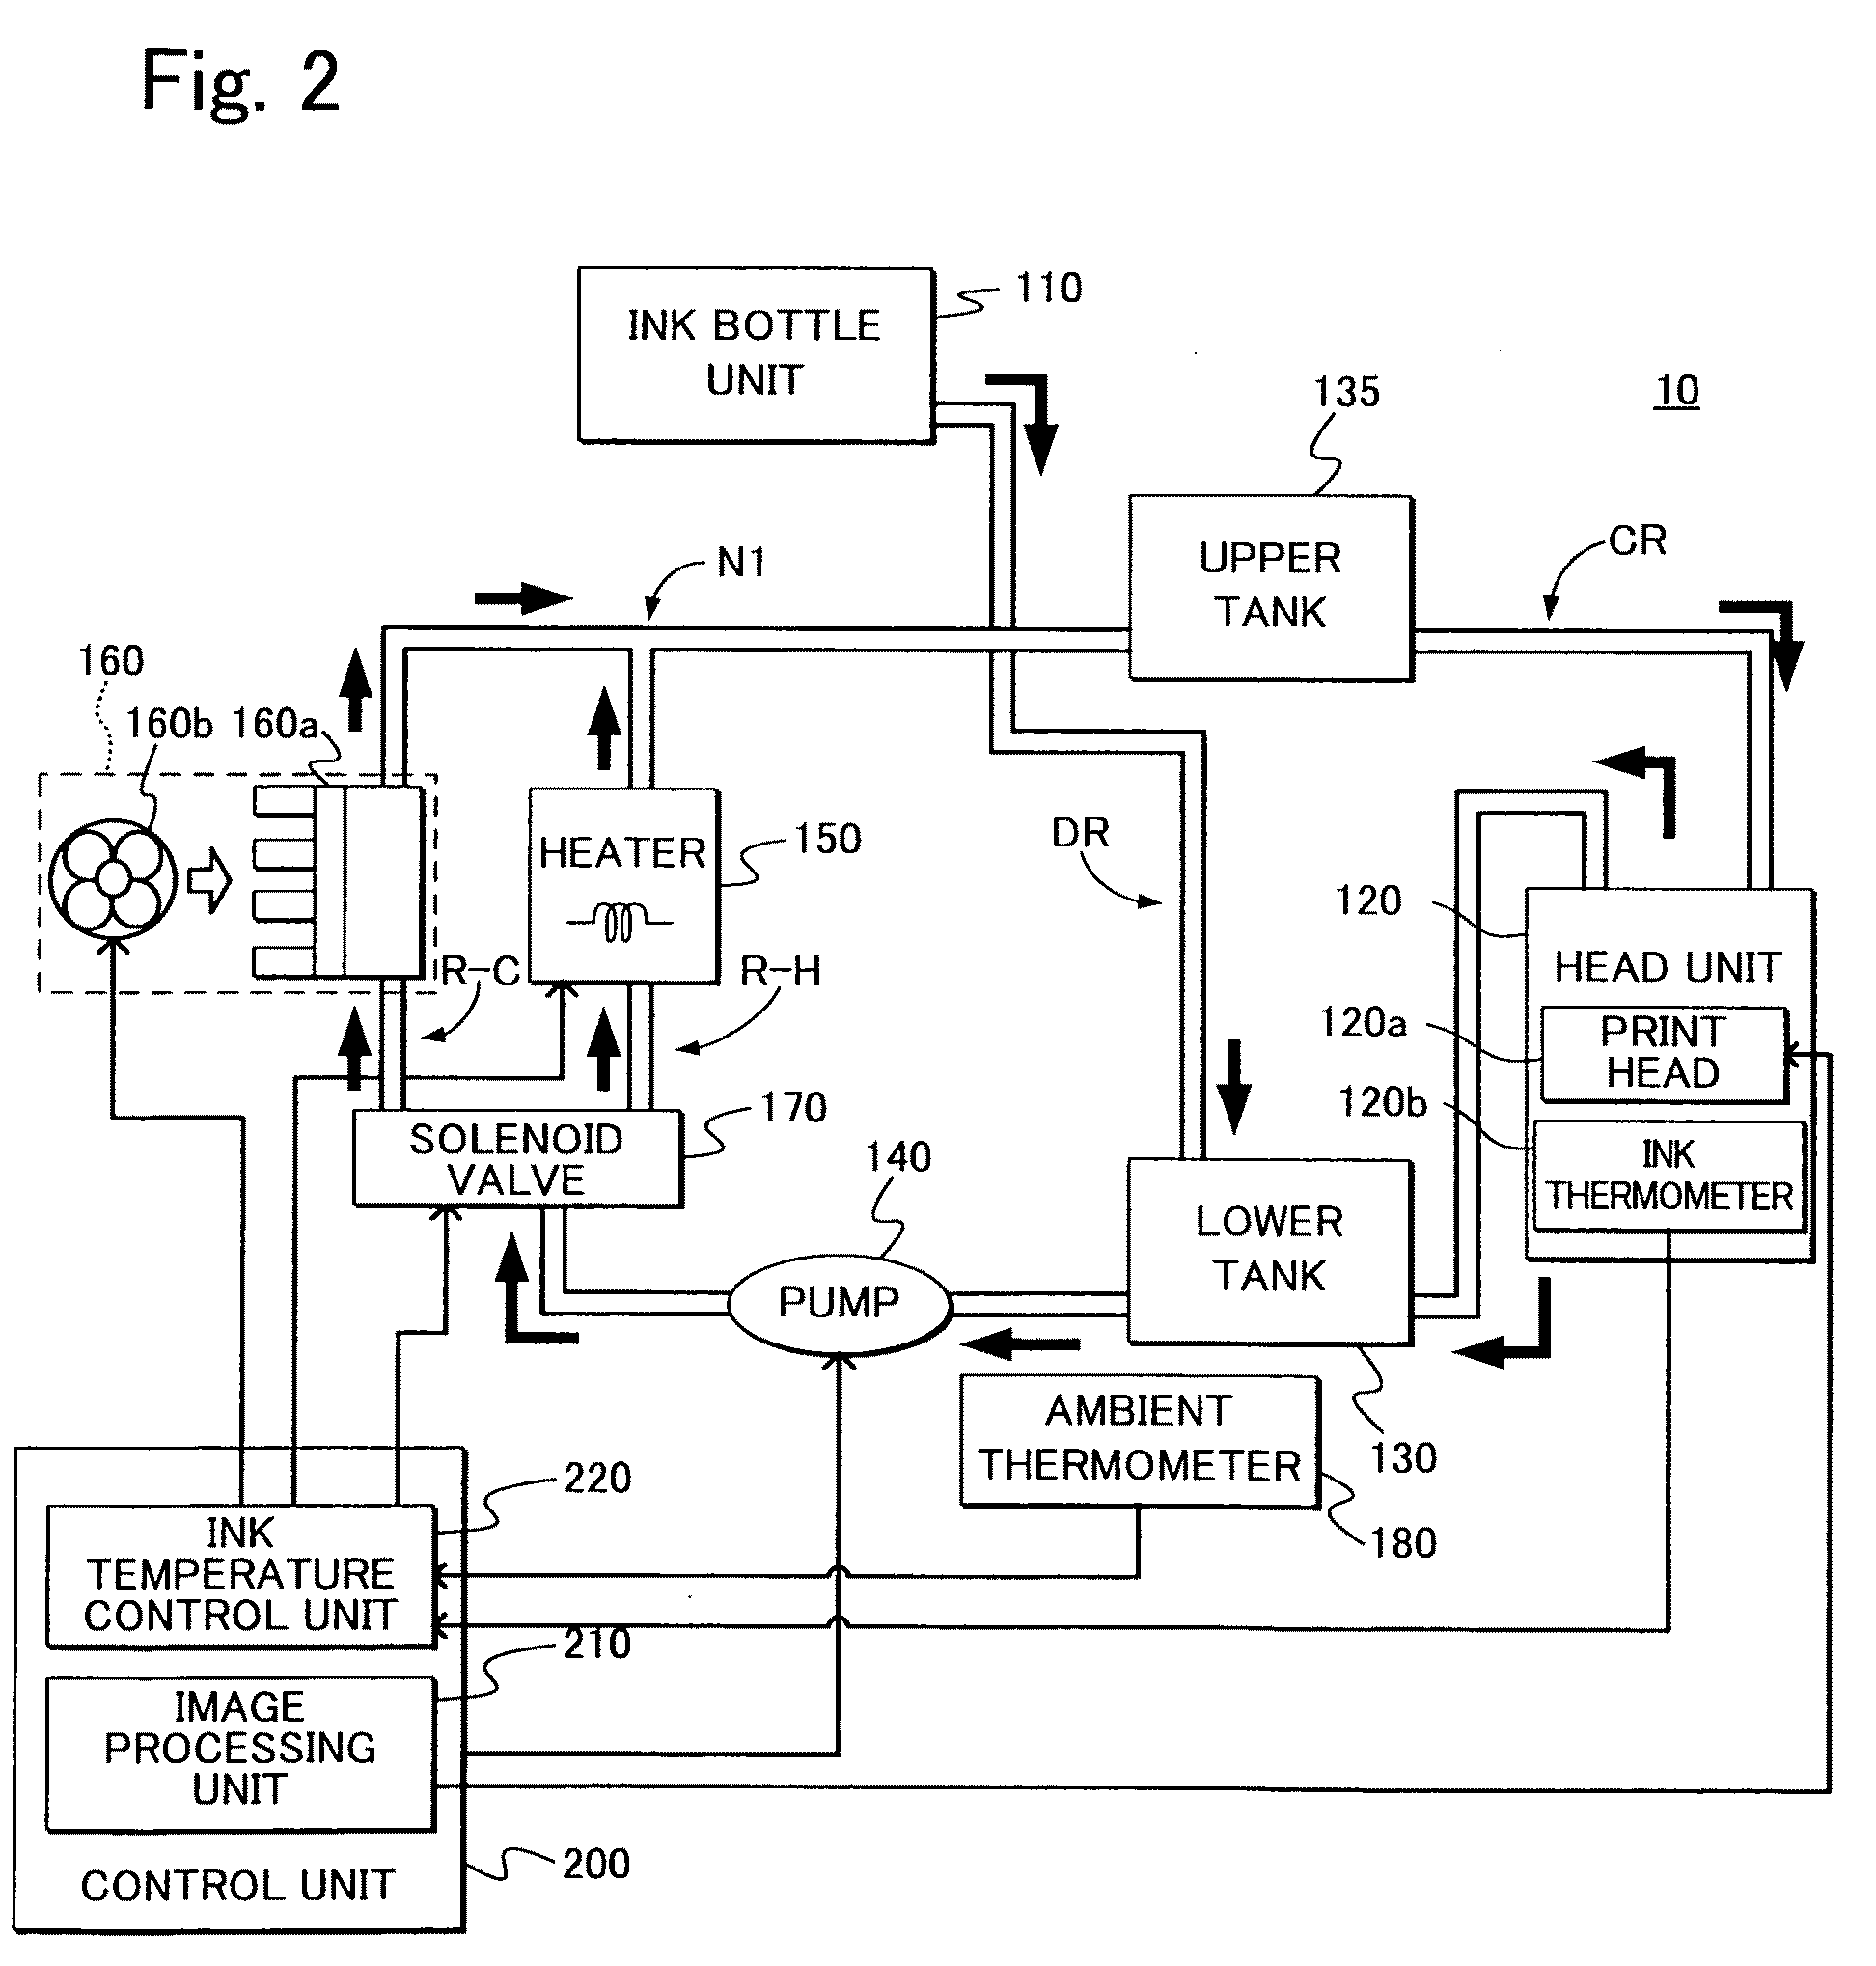 Printing apparatus capable of effectively heating and cooling ink